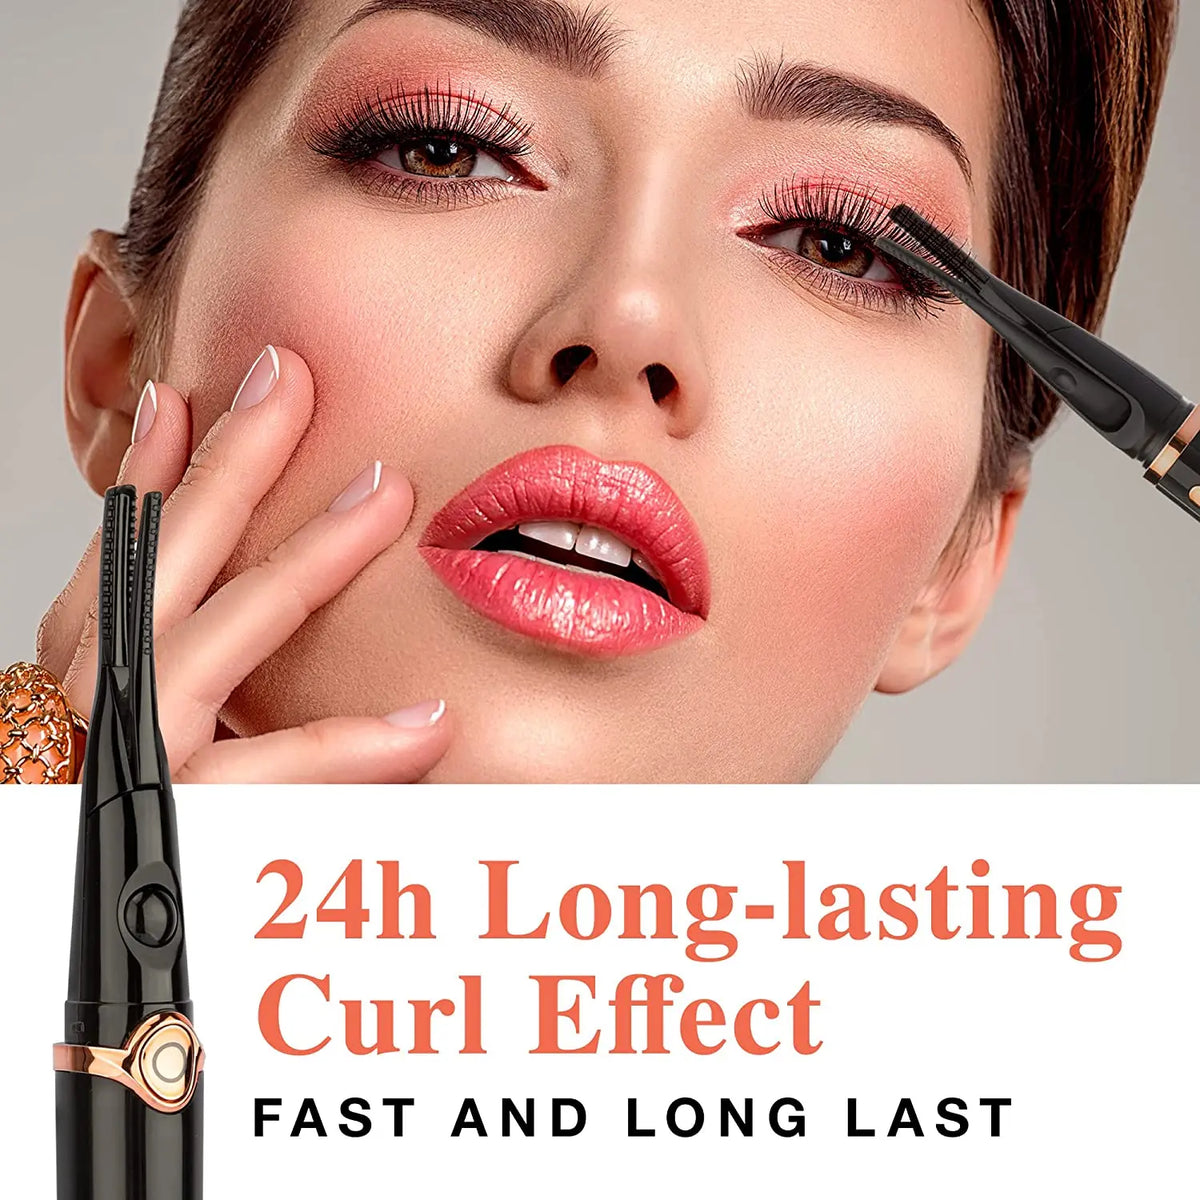 Heated Eyelash Curlers, 48 Hours Long Lasting with 3 Temperature Modes AYASAL